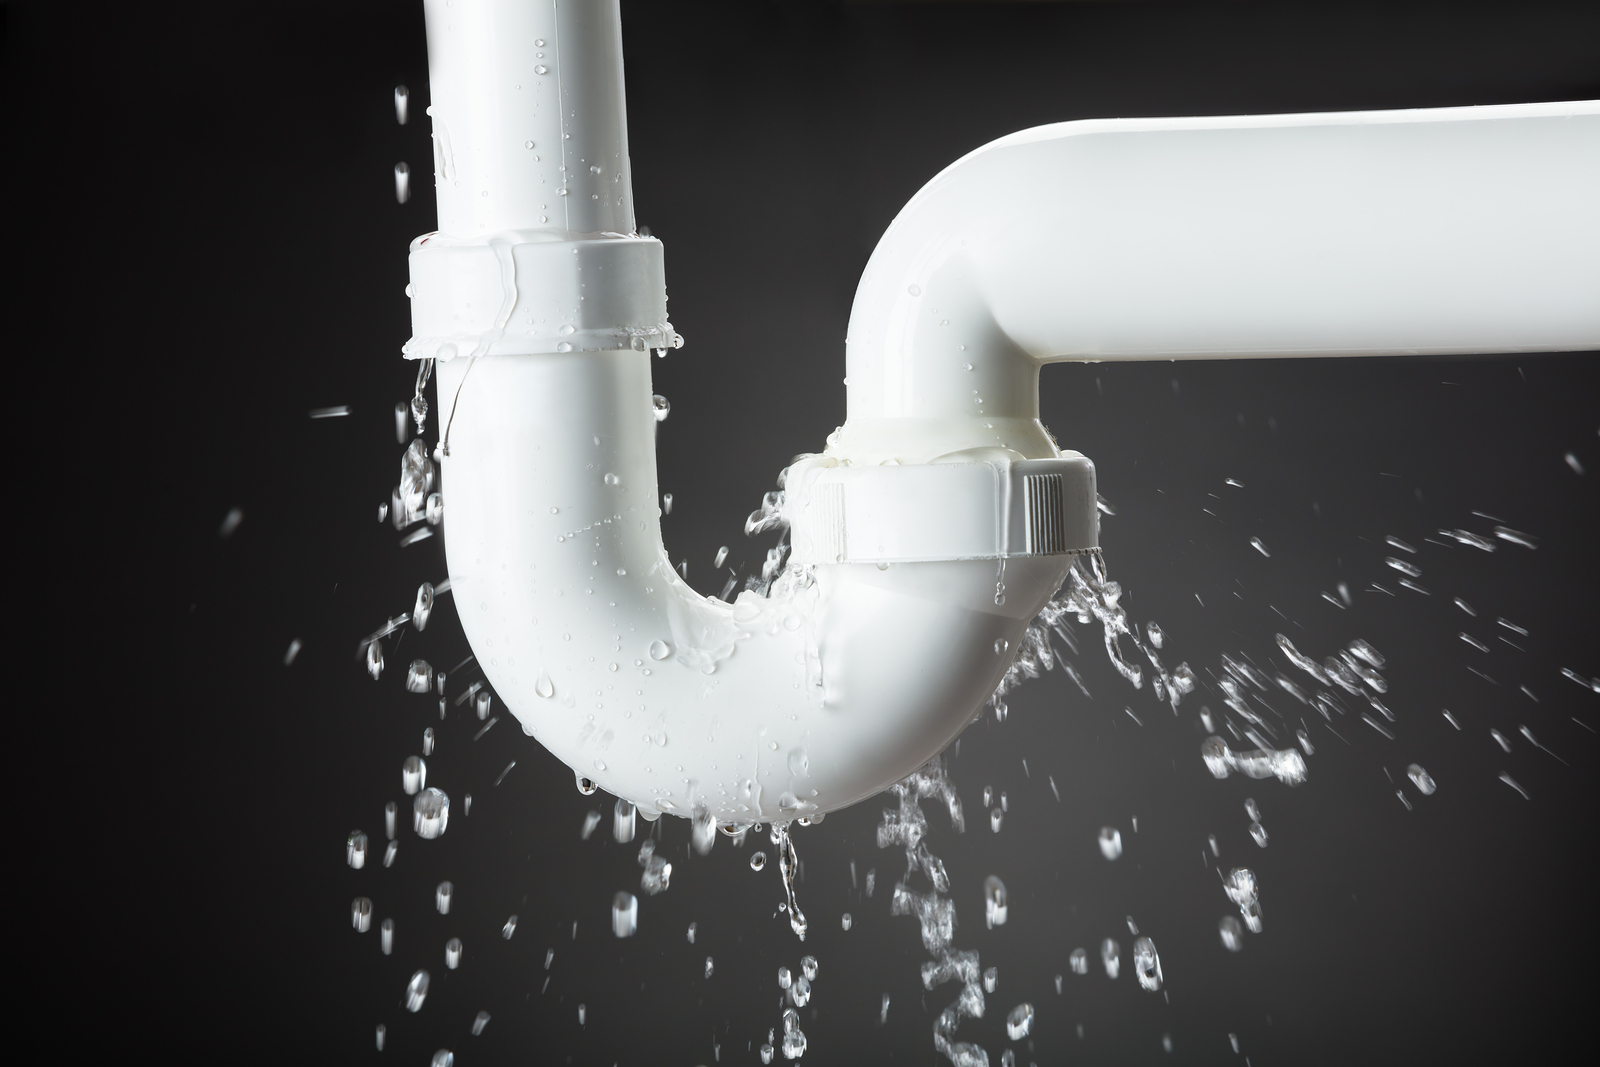 What to do if you have a burst pipe?